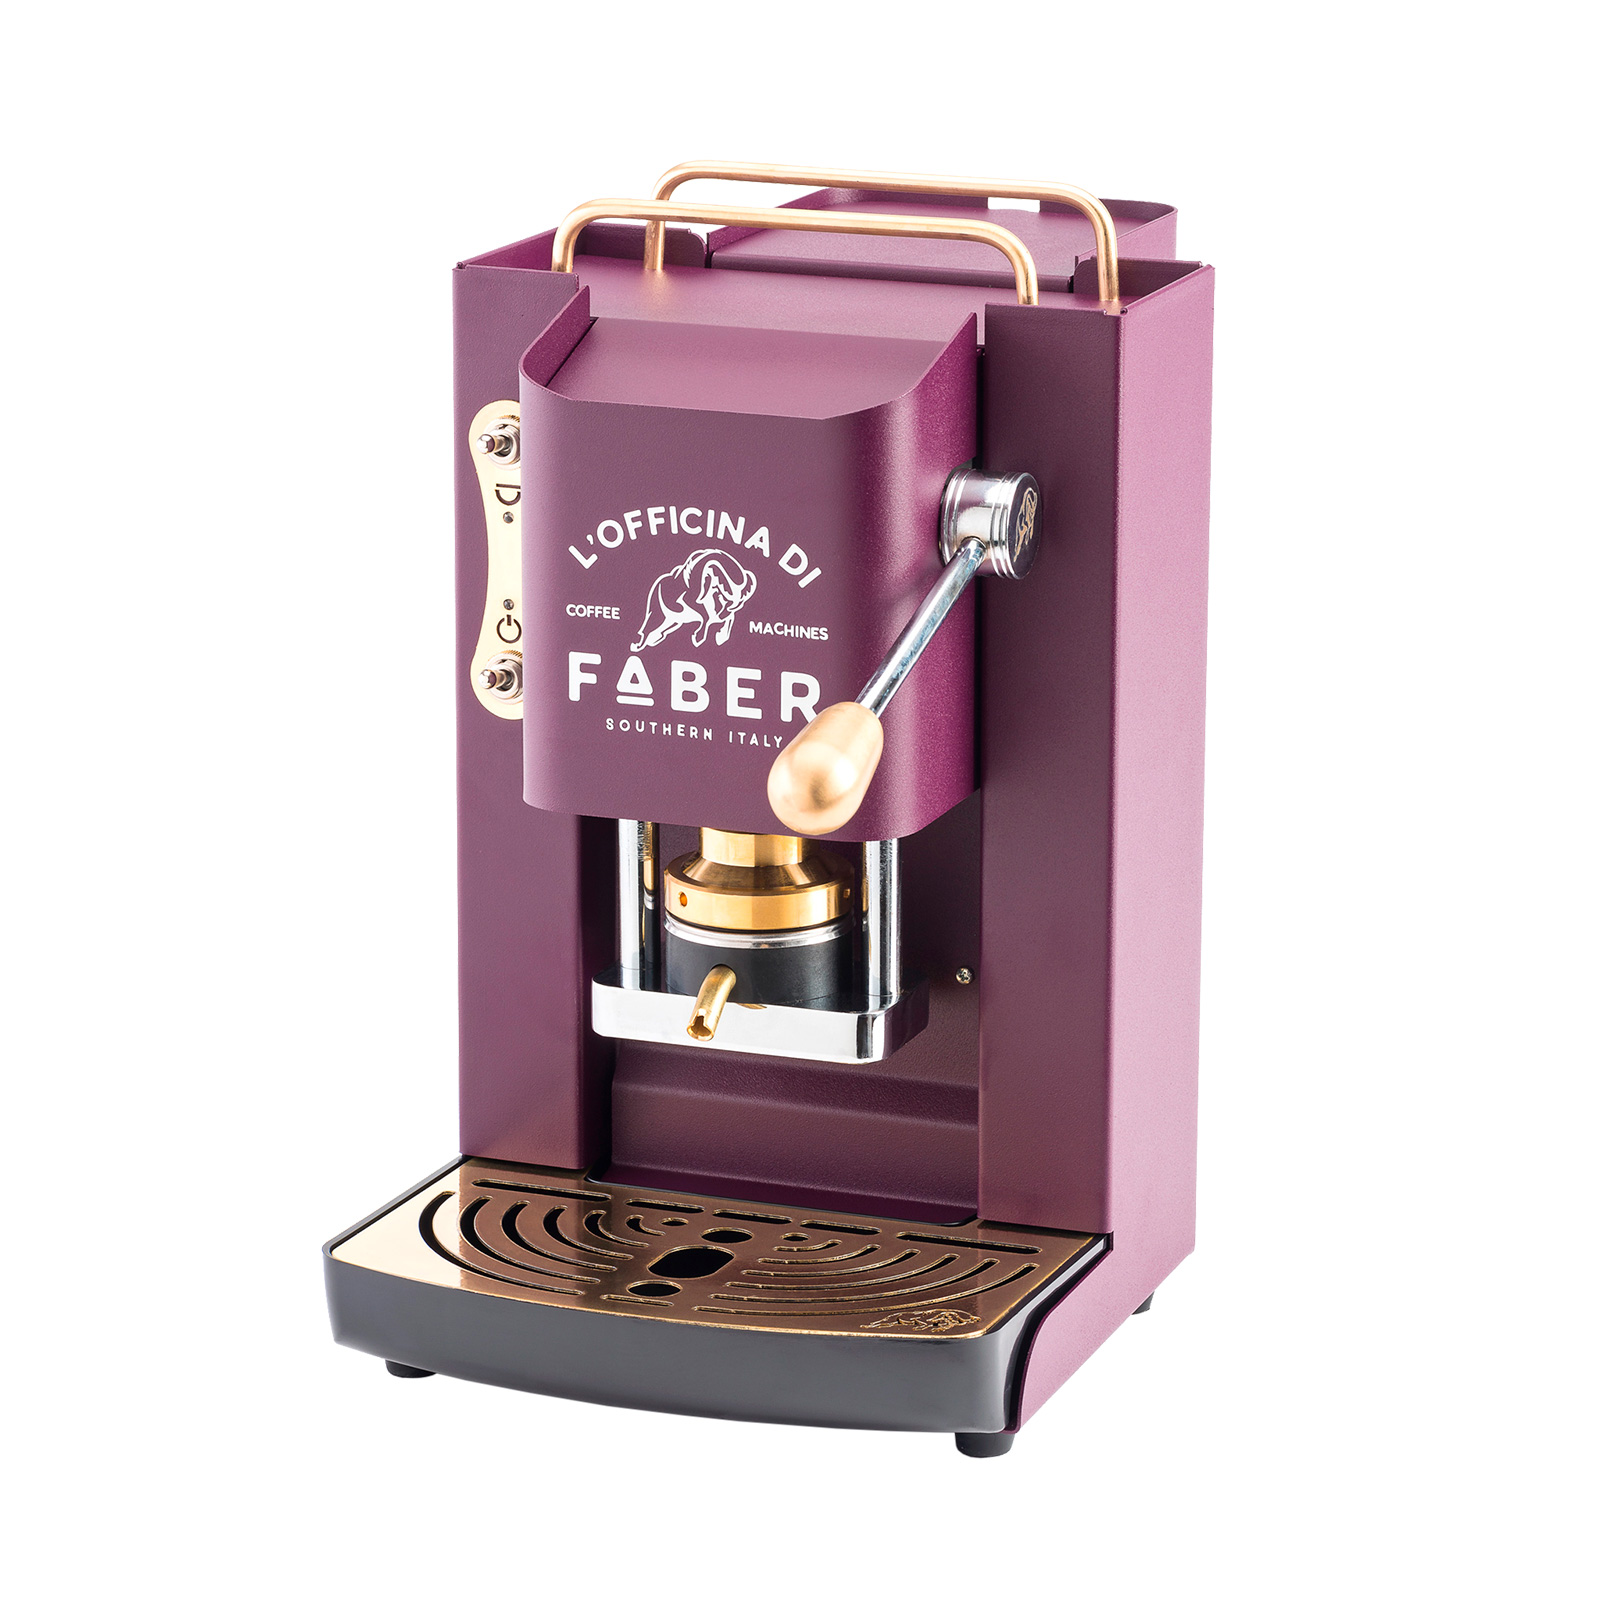 https://store.minutocaffe.it/wp-content/uploads/product_images/06002.jpg